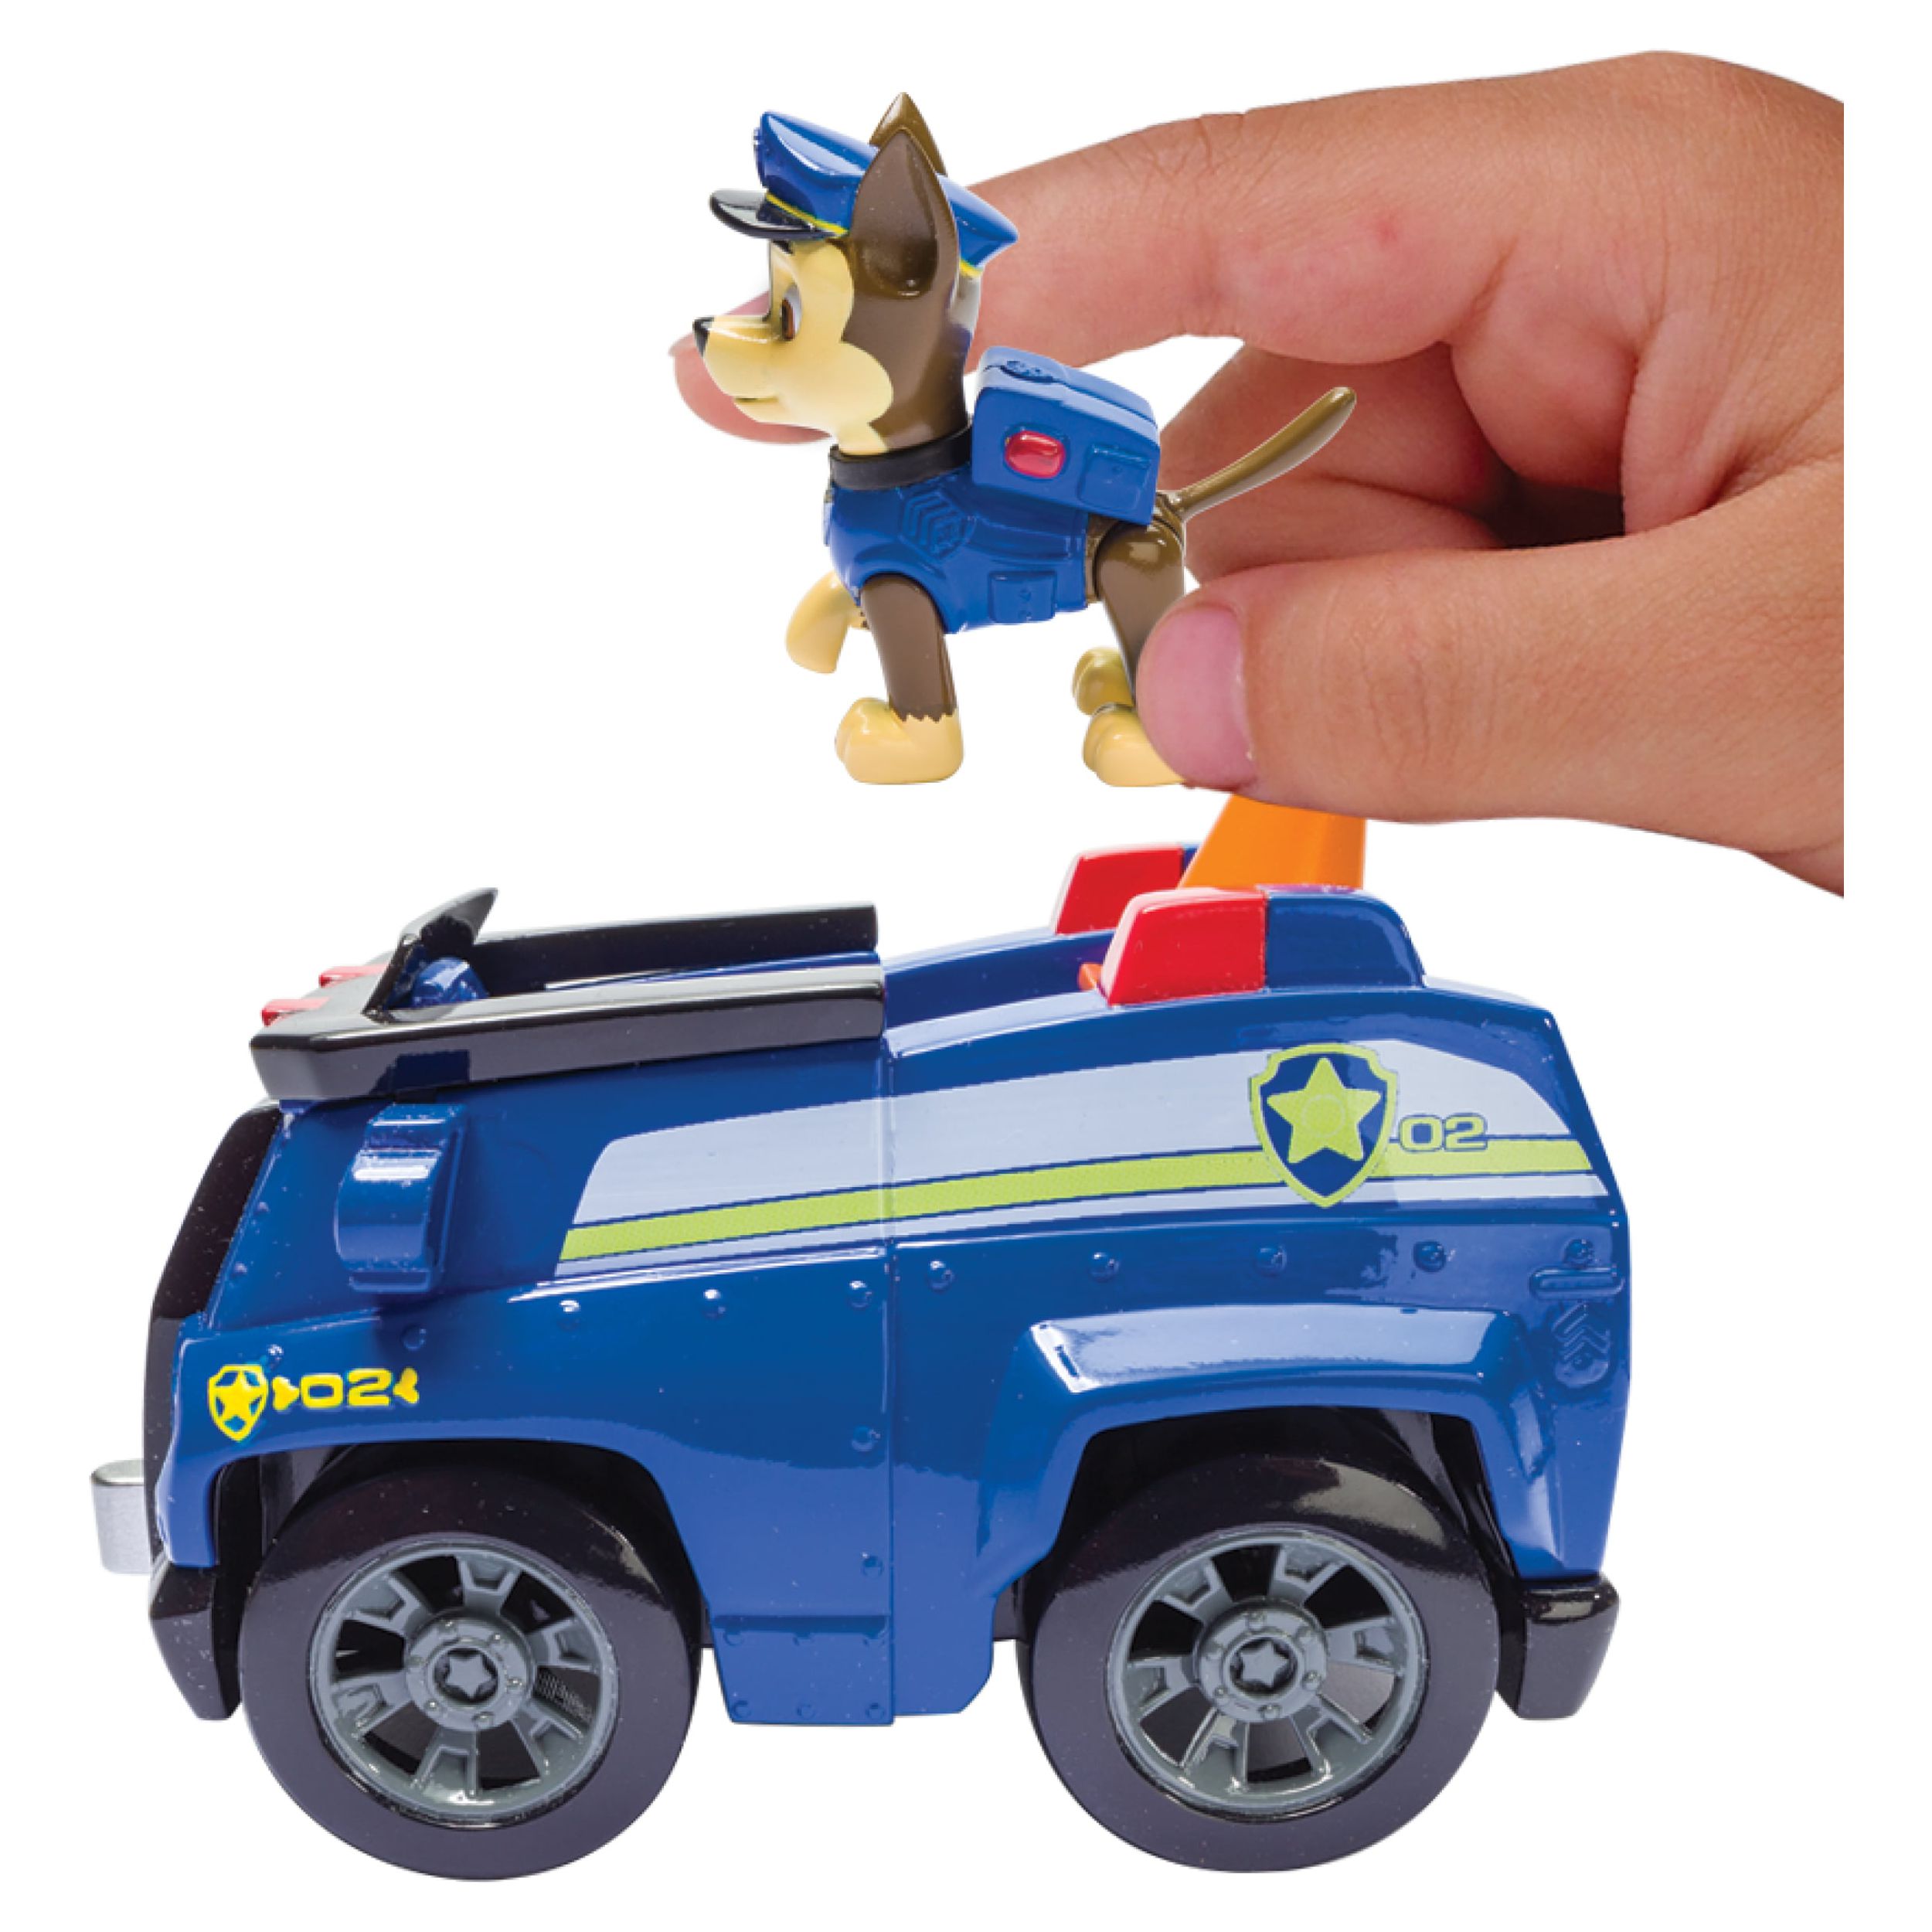 Paw Patrol Chase's Cruiser, Vehicle and Figure - image 4 of 6